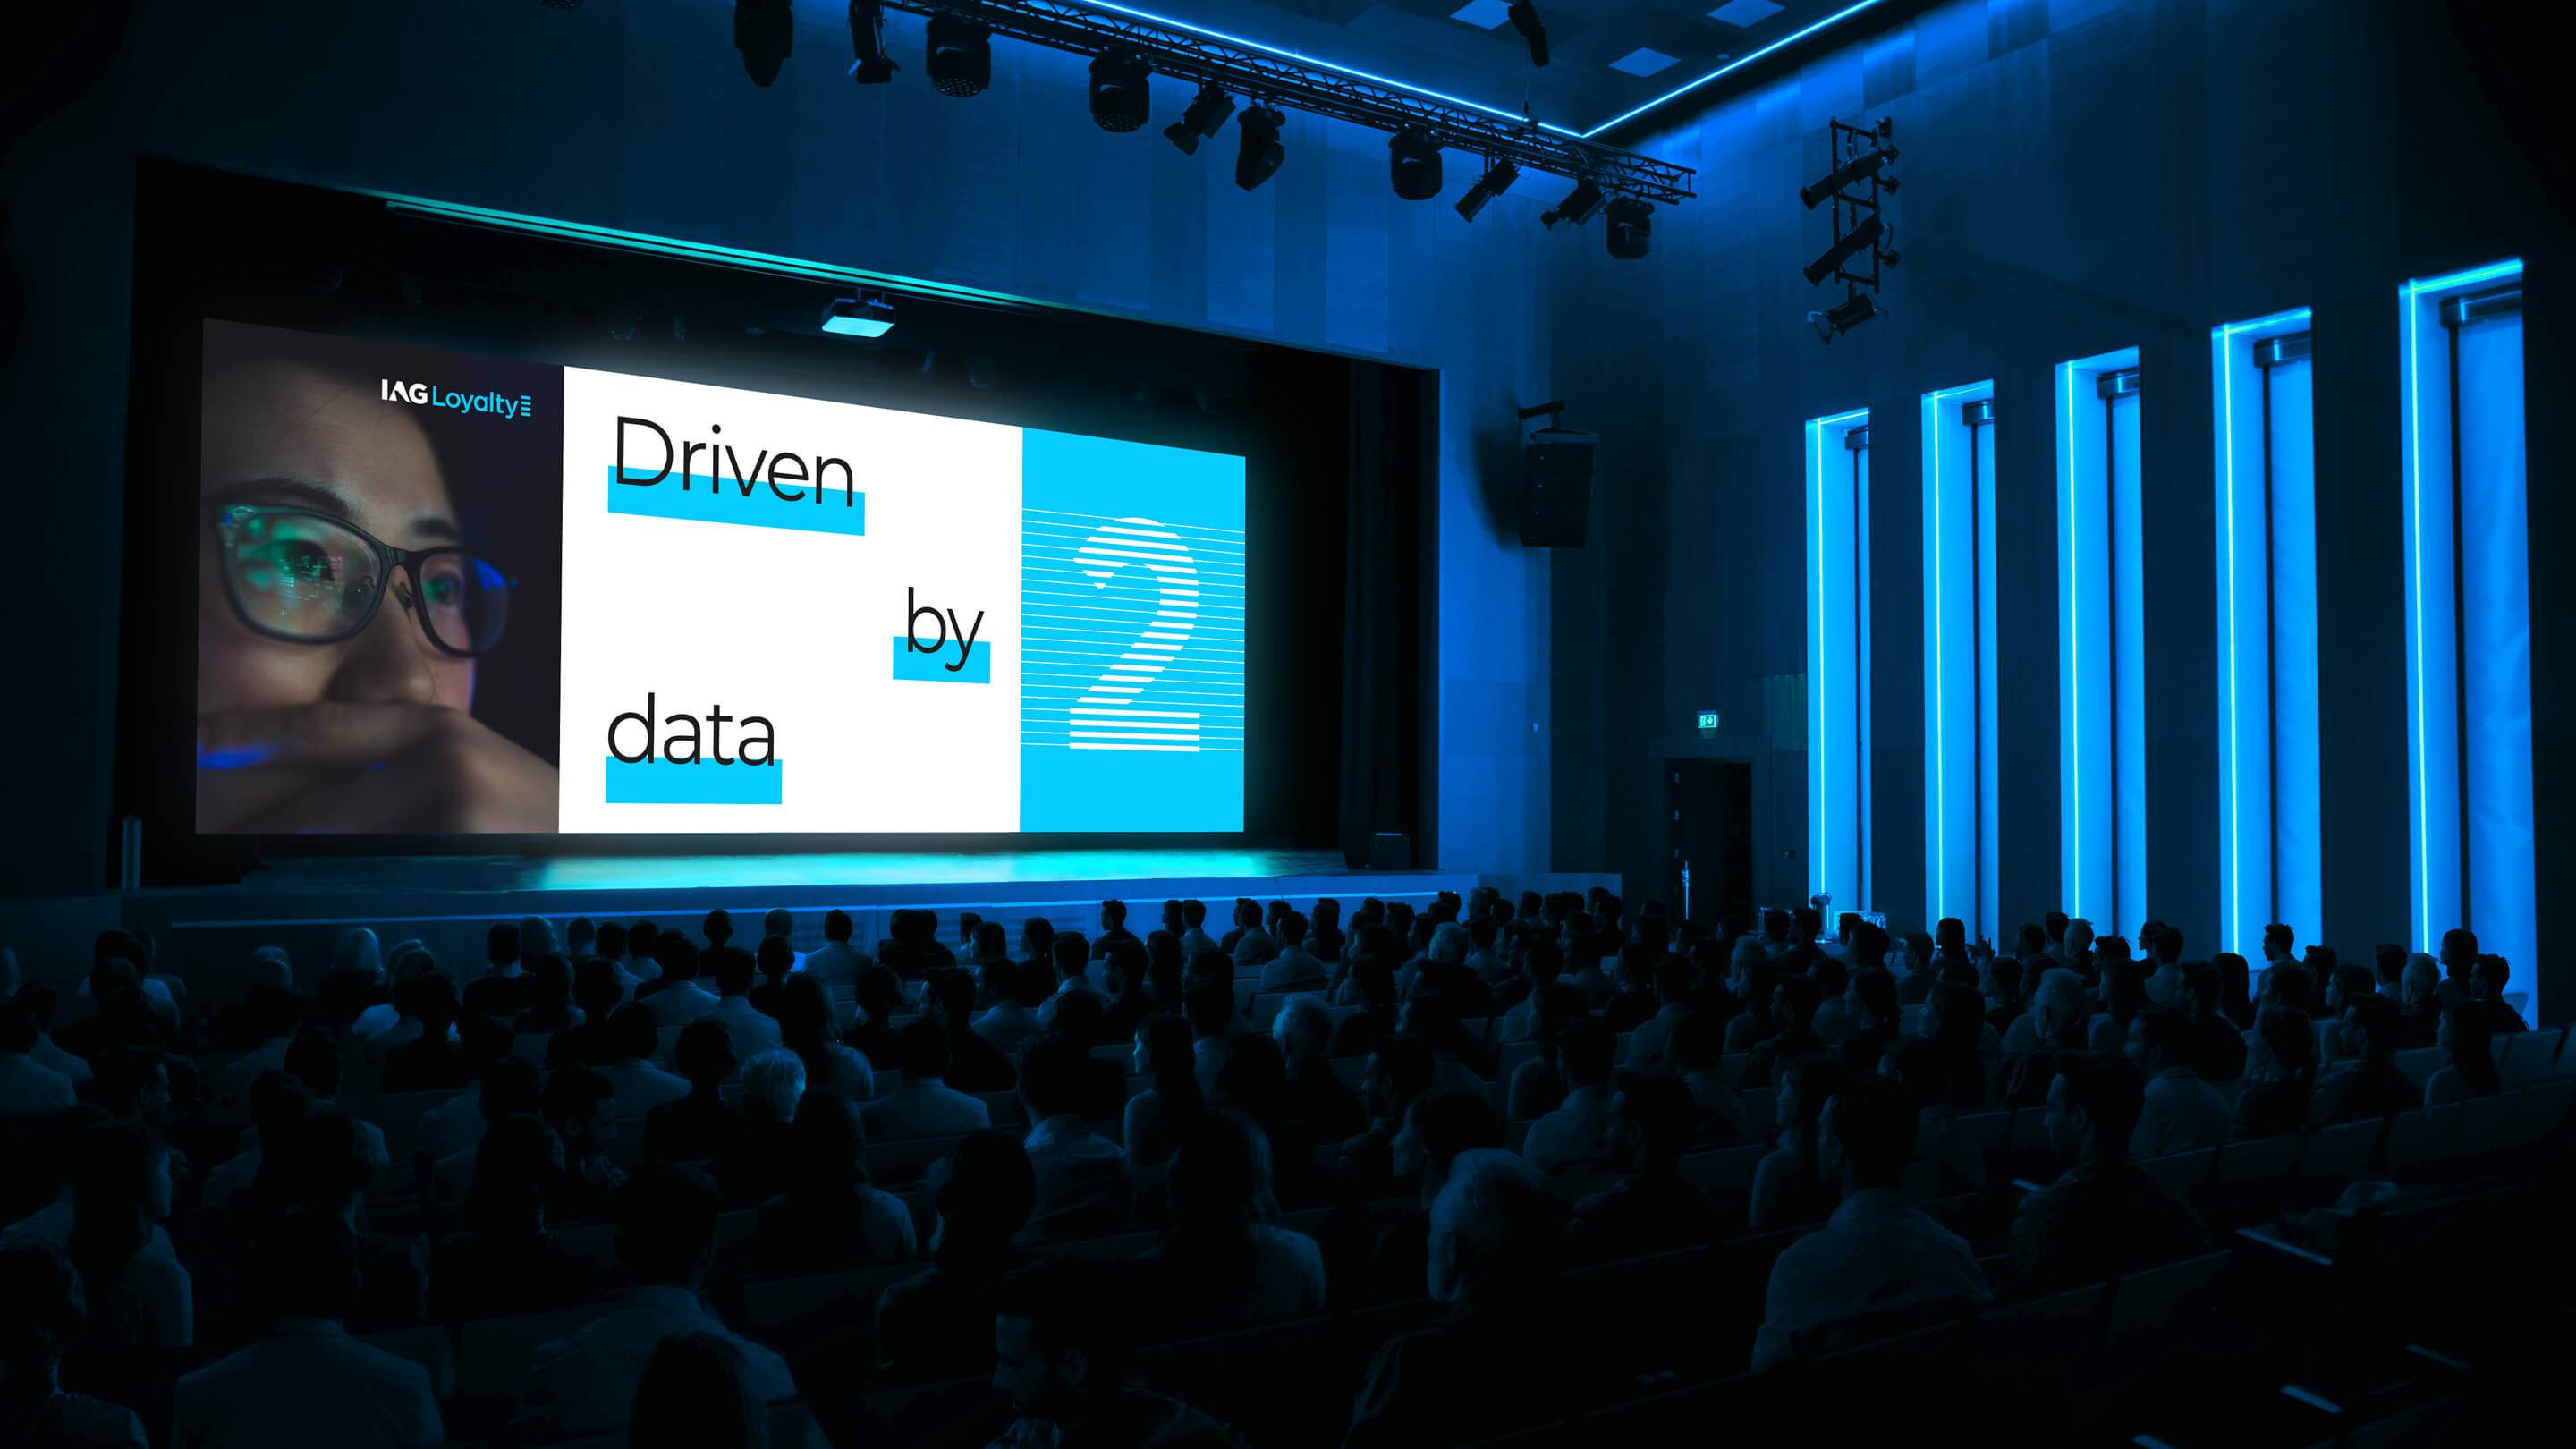 The words 'Driven by data' being displayed at what looks like a presentation at a large event.